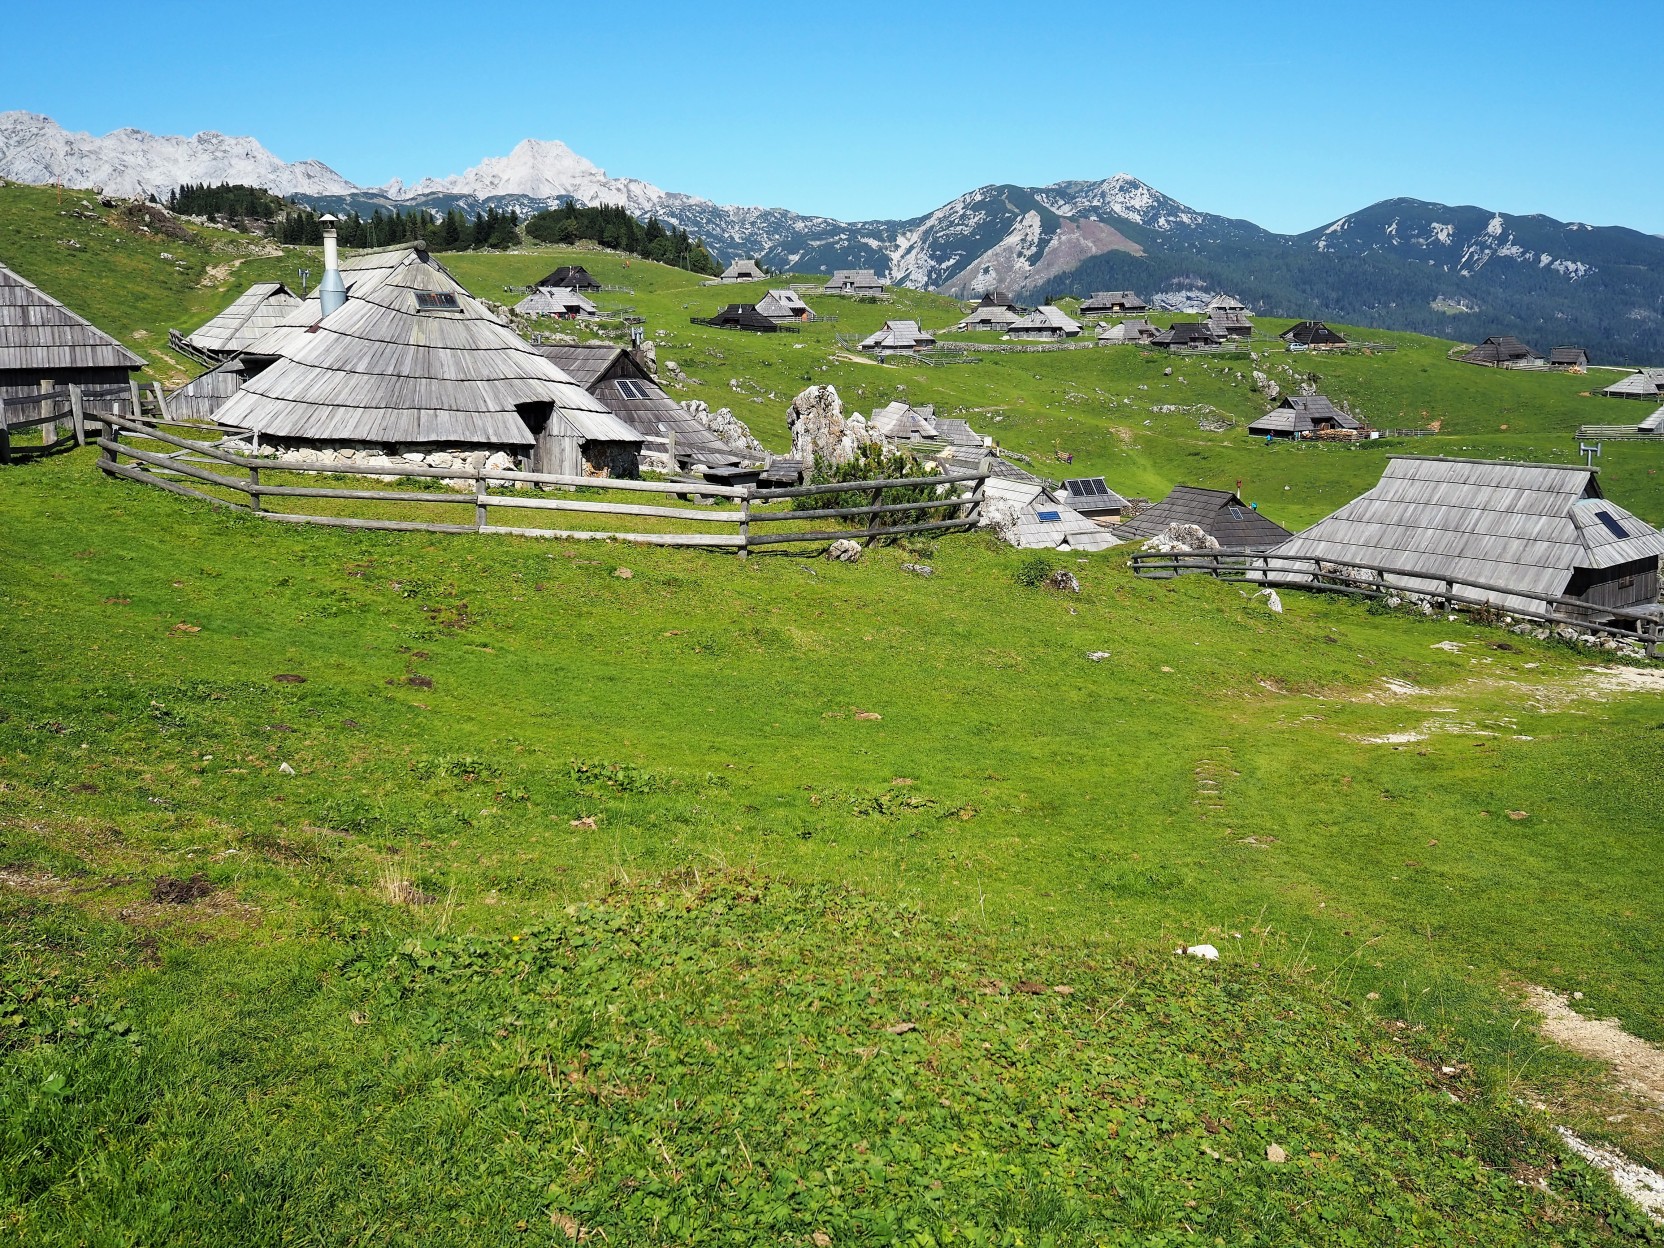 slanted roof dwellings for herdmens with green grass and Alps in background